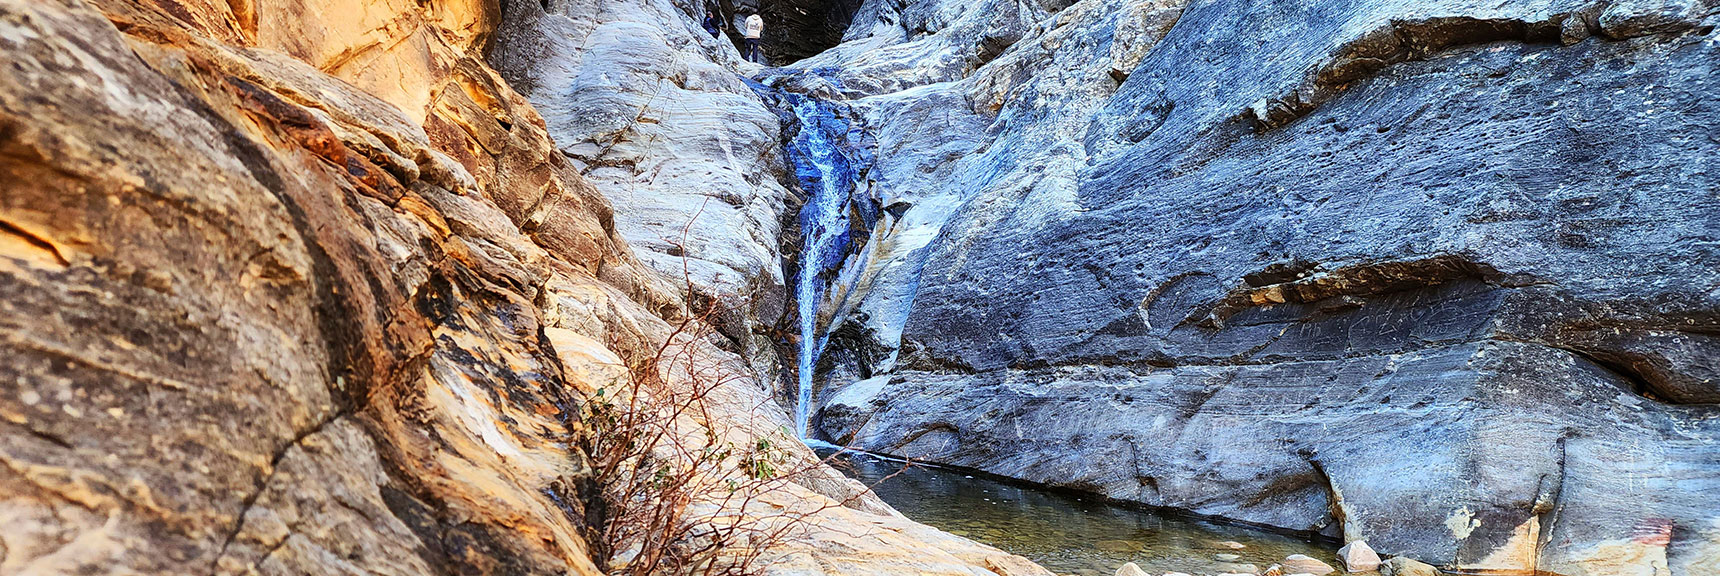 Lower Waterfall Cascades into a Quiet Pool | Ice Box Canyon | Red Rock Canyon NCA, Nevada | Las Vegas Area Trails | David Smith